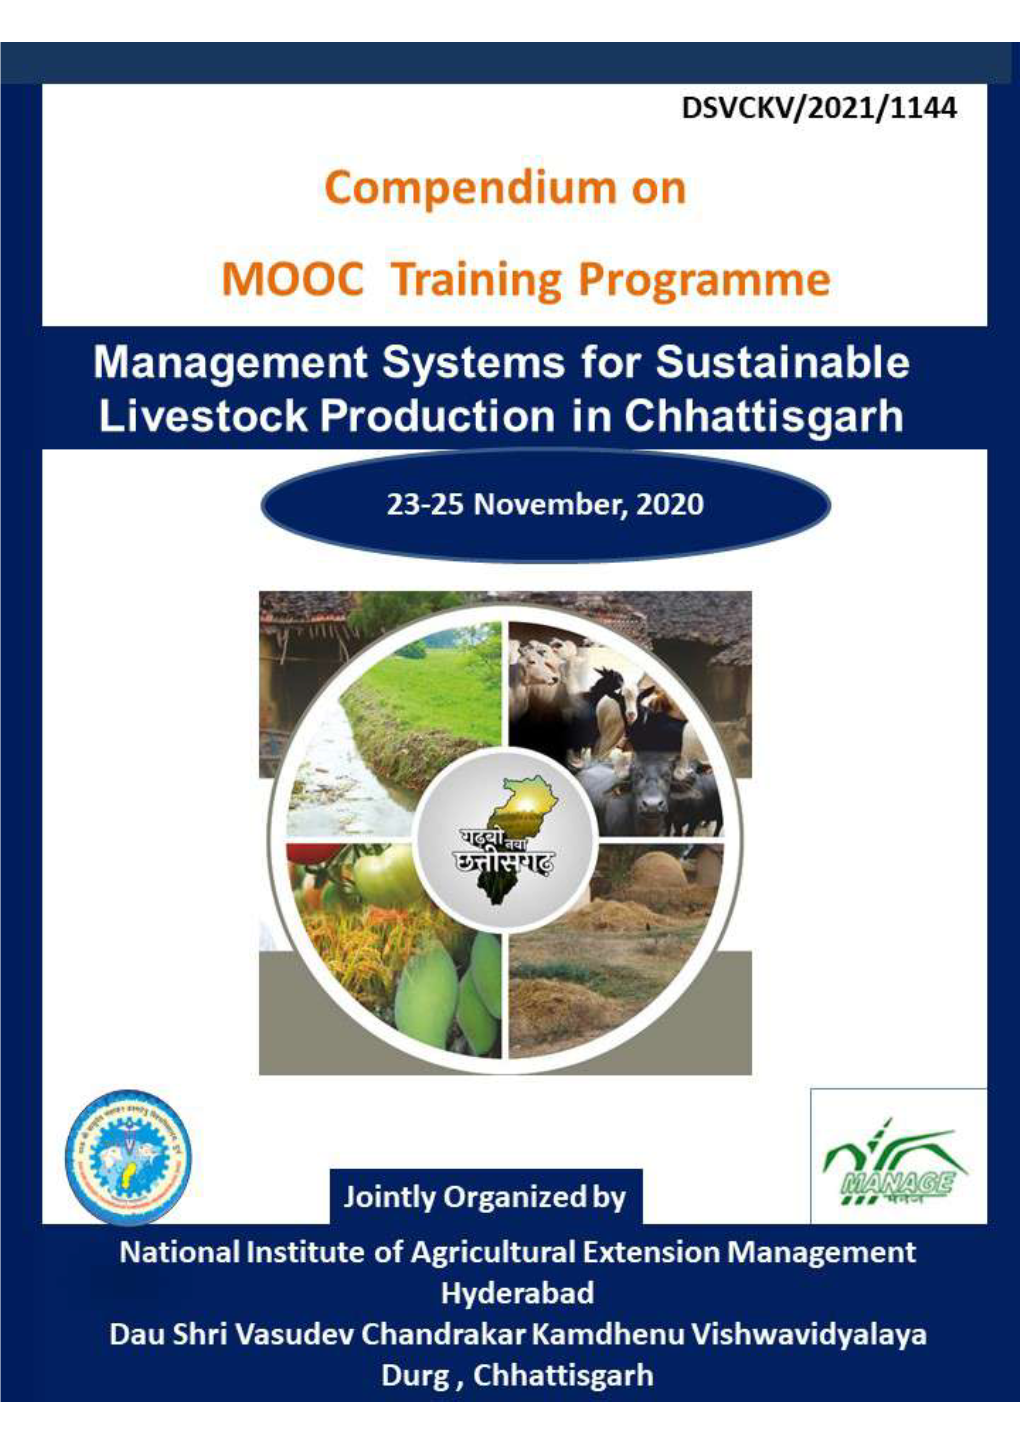 Management Systems for Sustainable Livestock Production in Chattisgarh